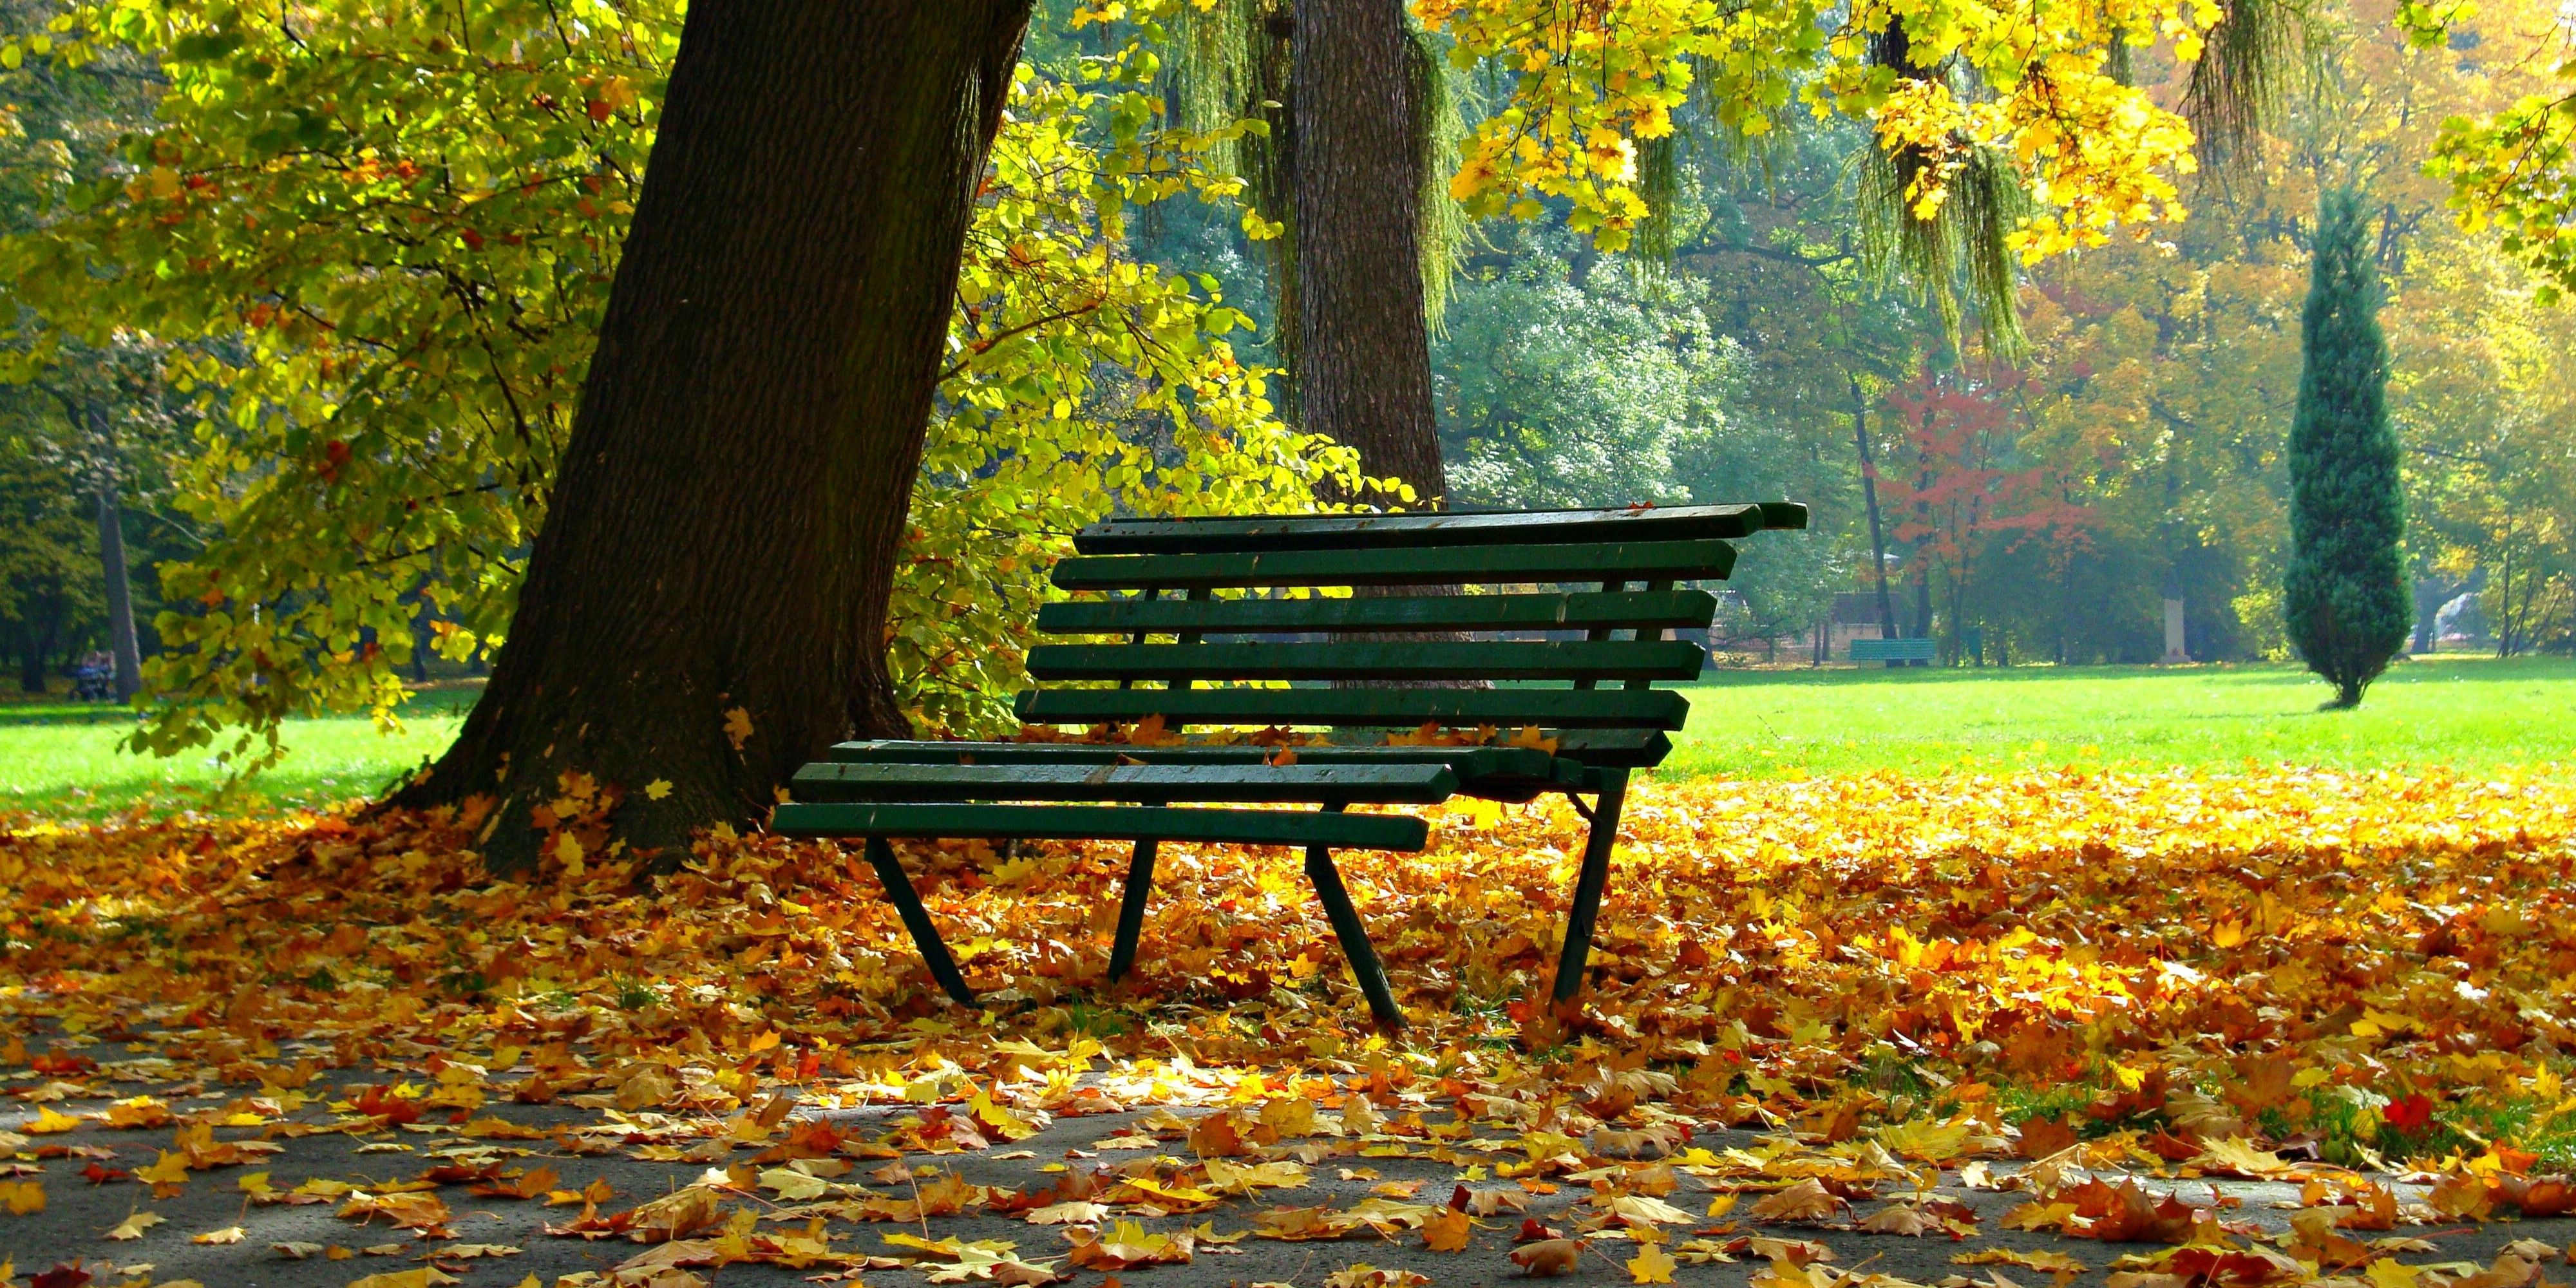 An image of a park bench in the fall with a pile of dead leaves beneath it